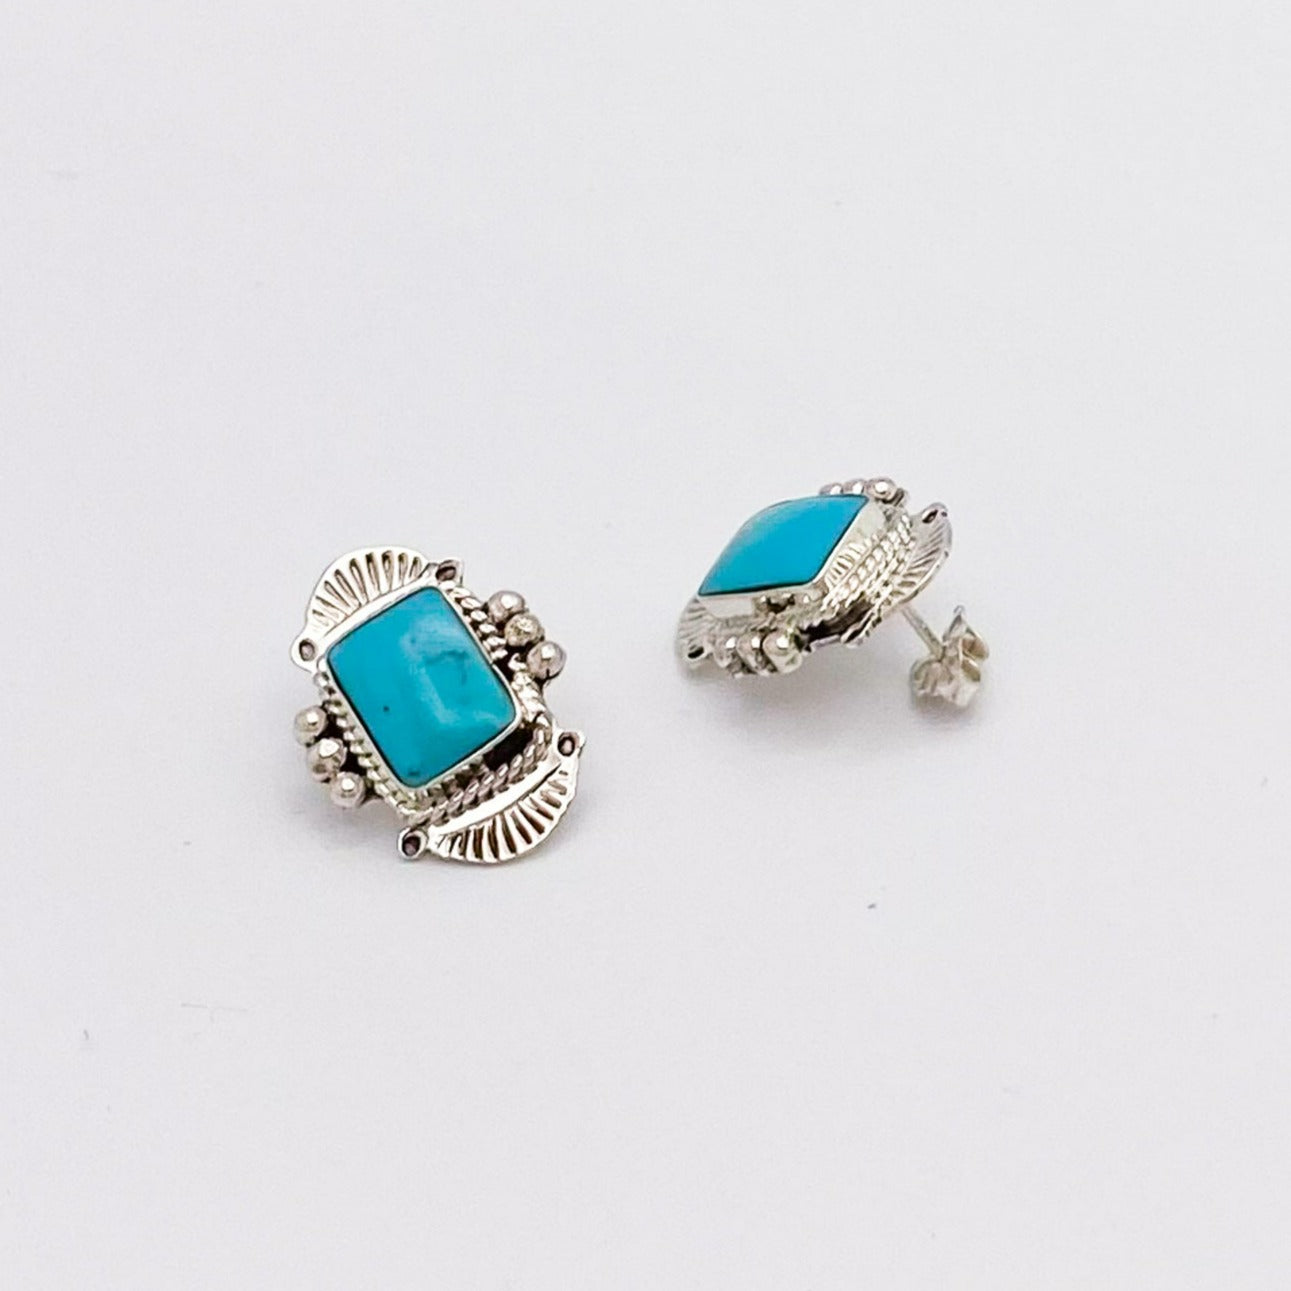 Elaborate Navajo Turquoise Sterling Silver Studs